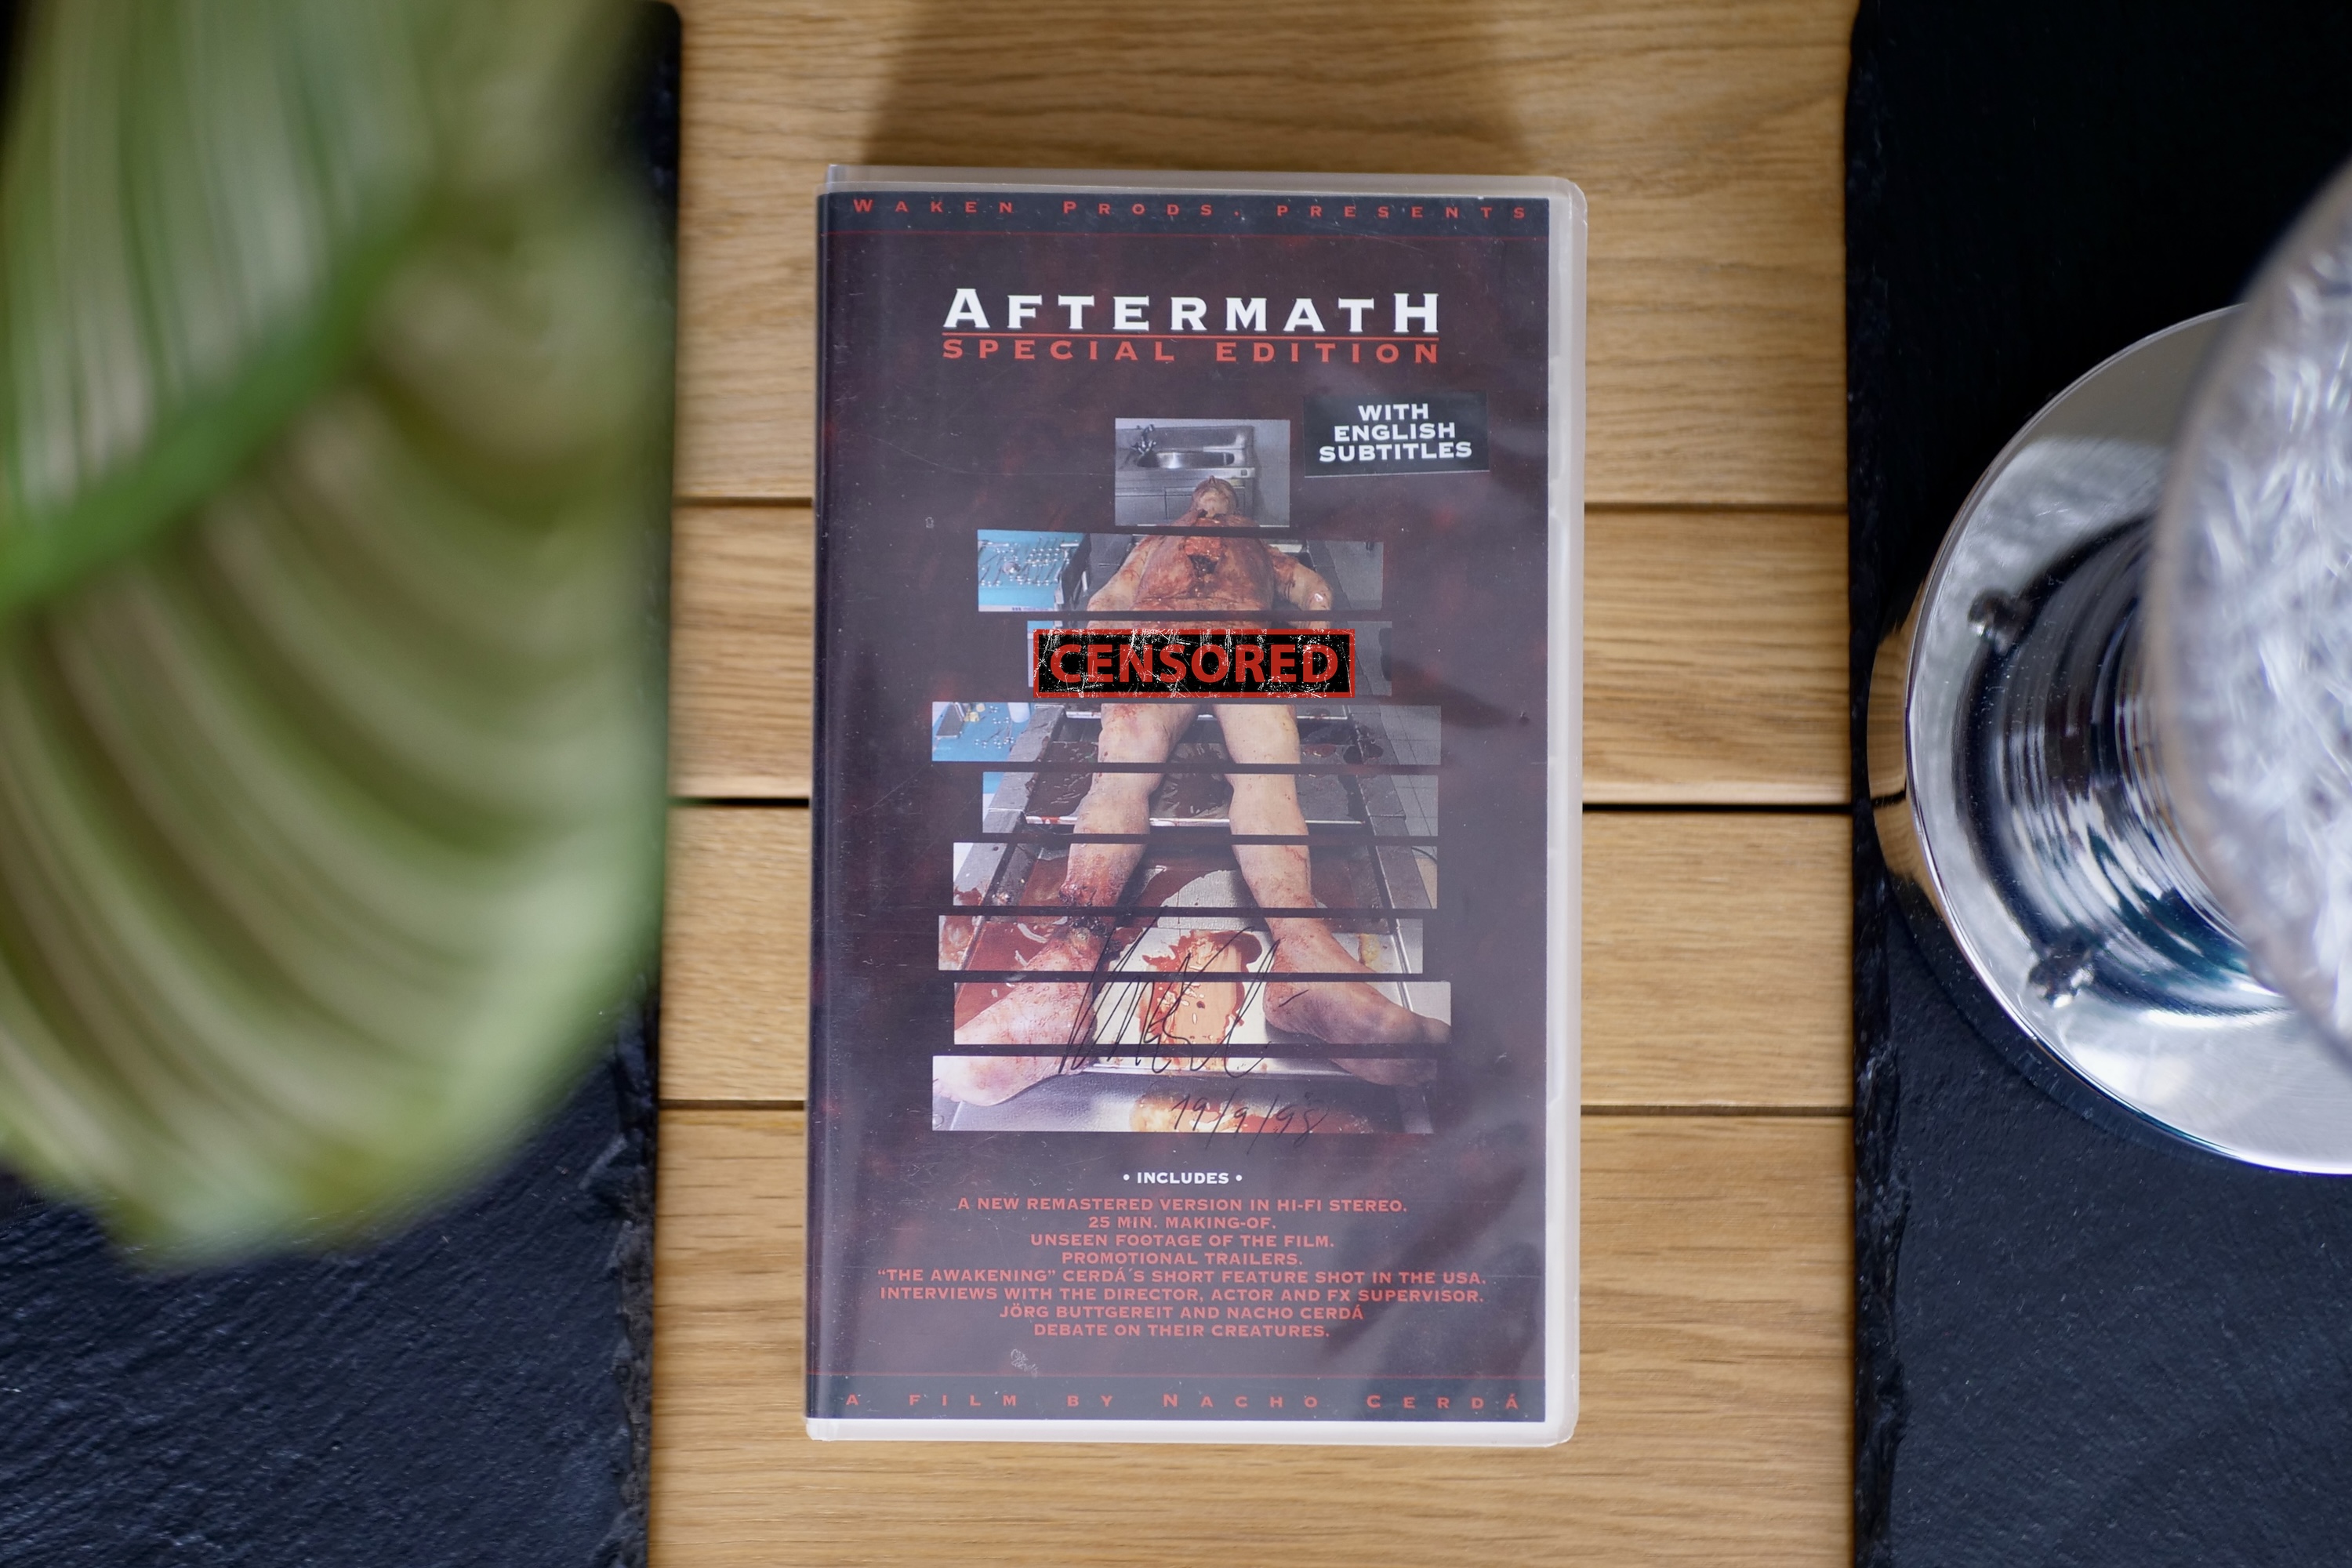 The front cover to an Aftermath VHS box.